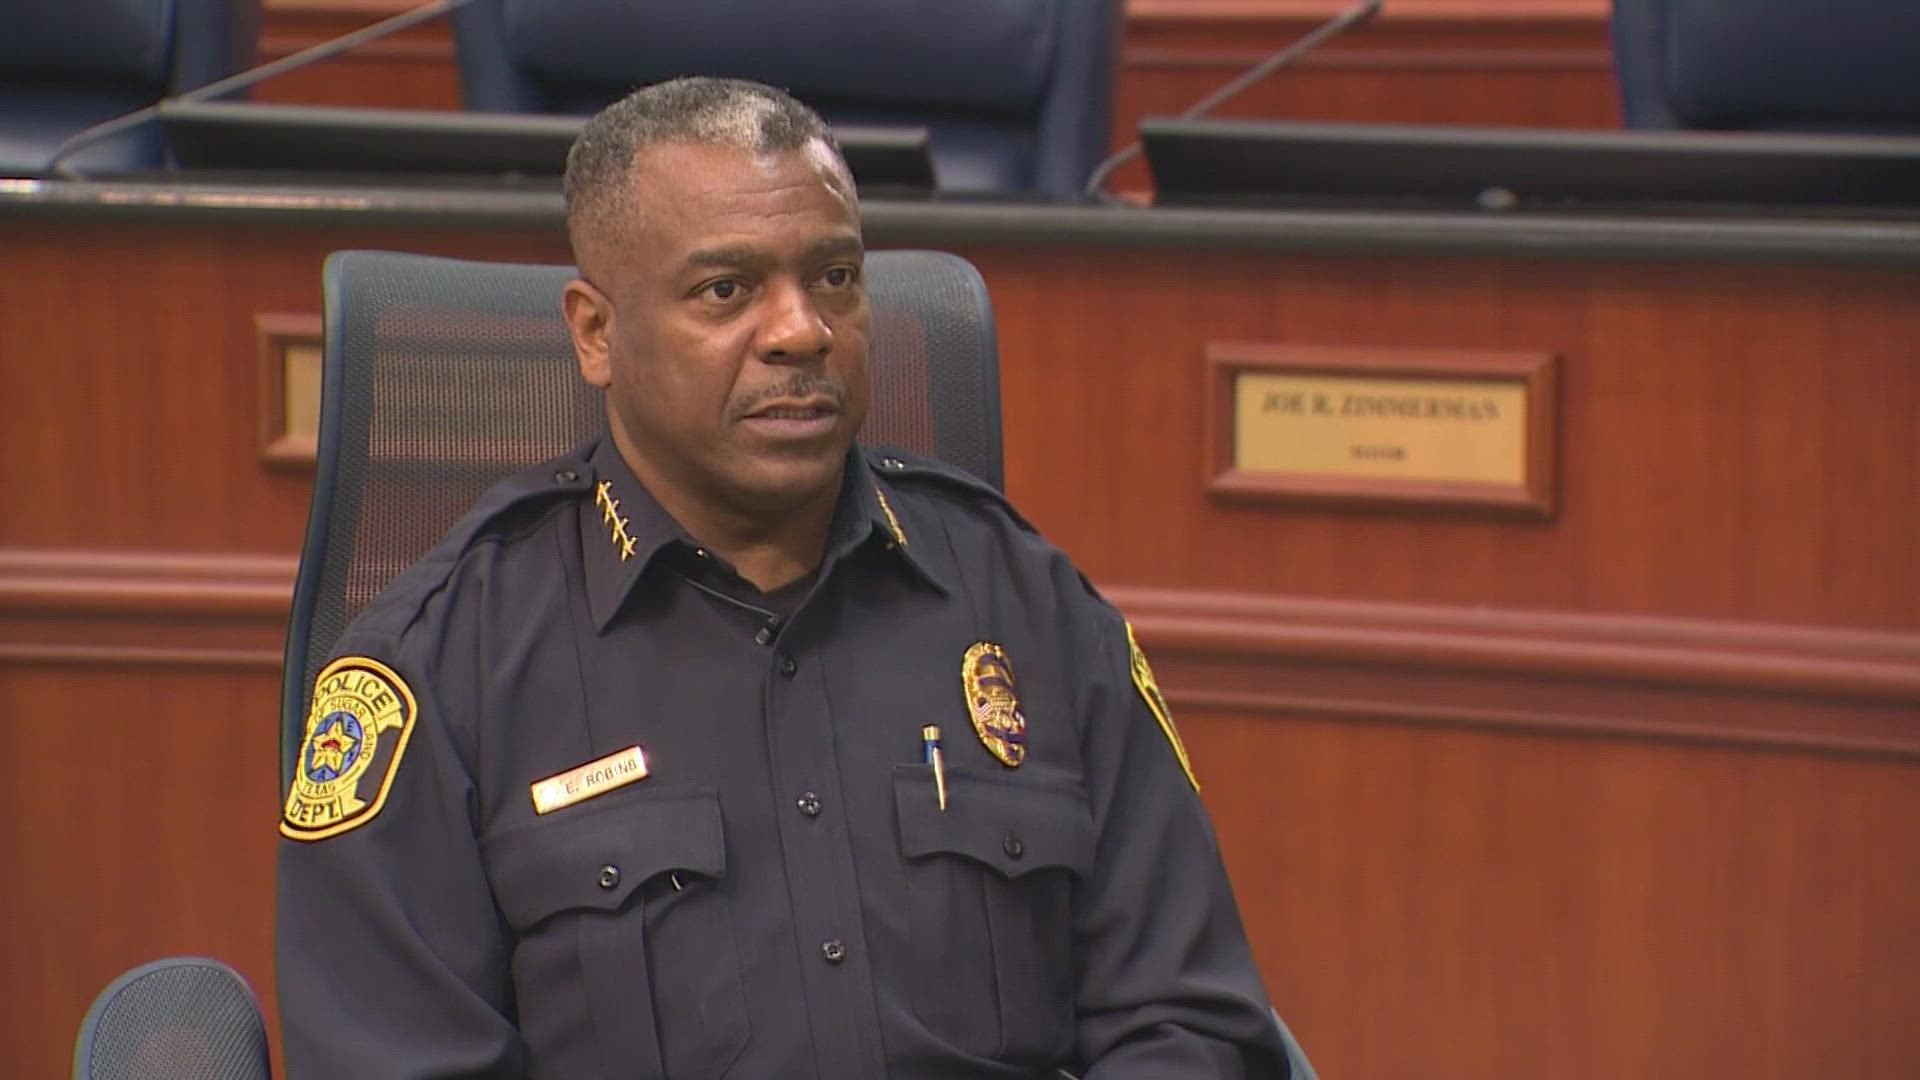 Chief Eric Robins says his officers did not give a retired officer special treatment during an investigation into an August shooting.